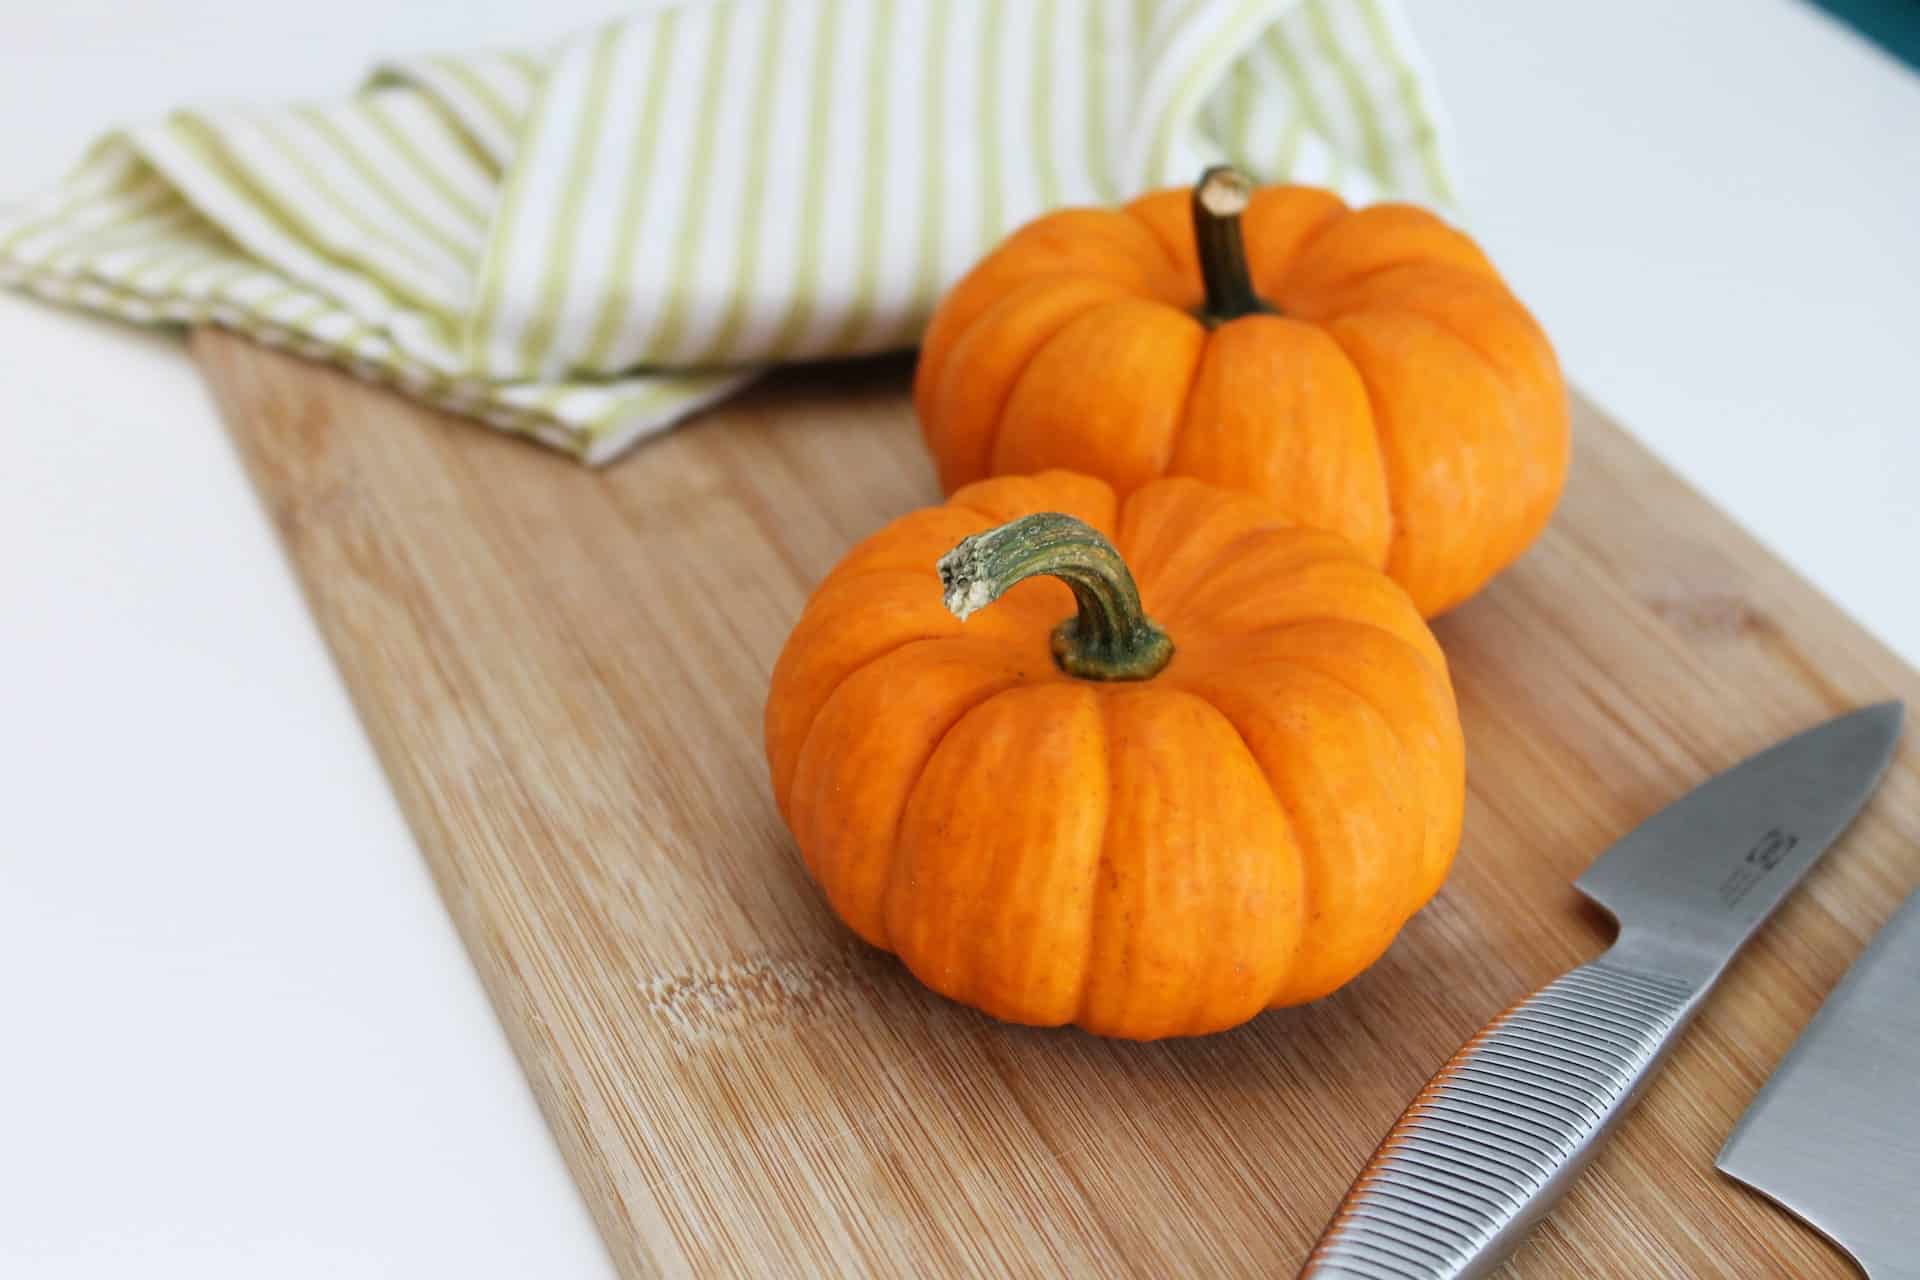 5 ideas for dishes with pumpkin in the starring role